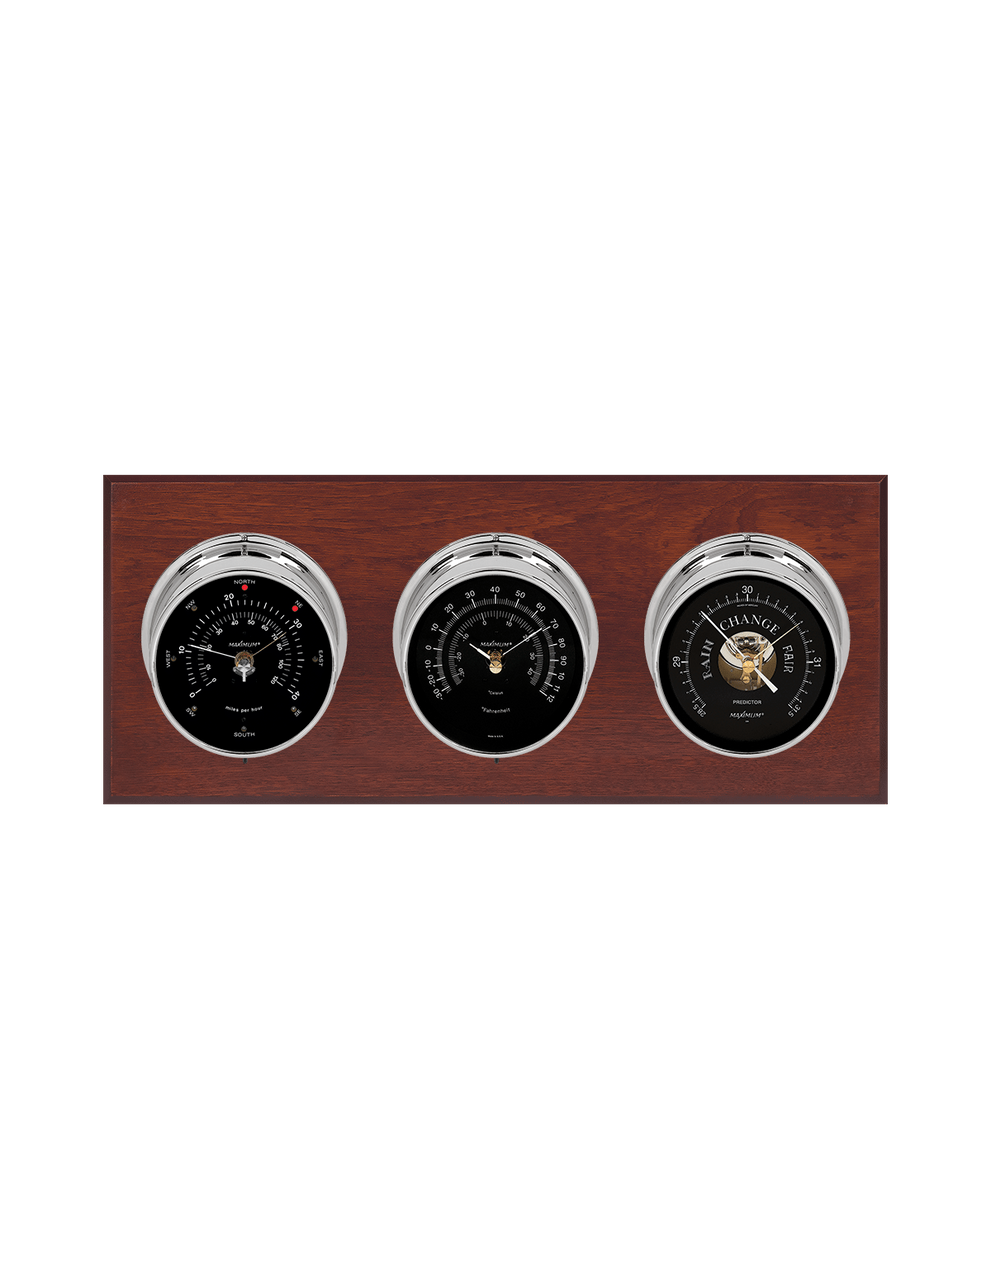 Montauk Thermometer, Wind, and Barometer Weather Station - 3 Instruments - Polished Chrome Cases - Mahogany - 2 Scales -Reads 0-120 mph